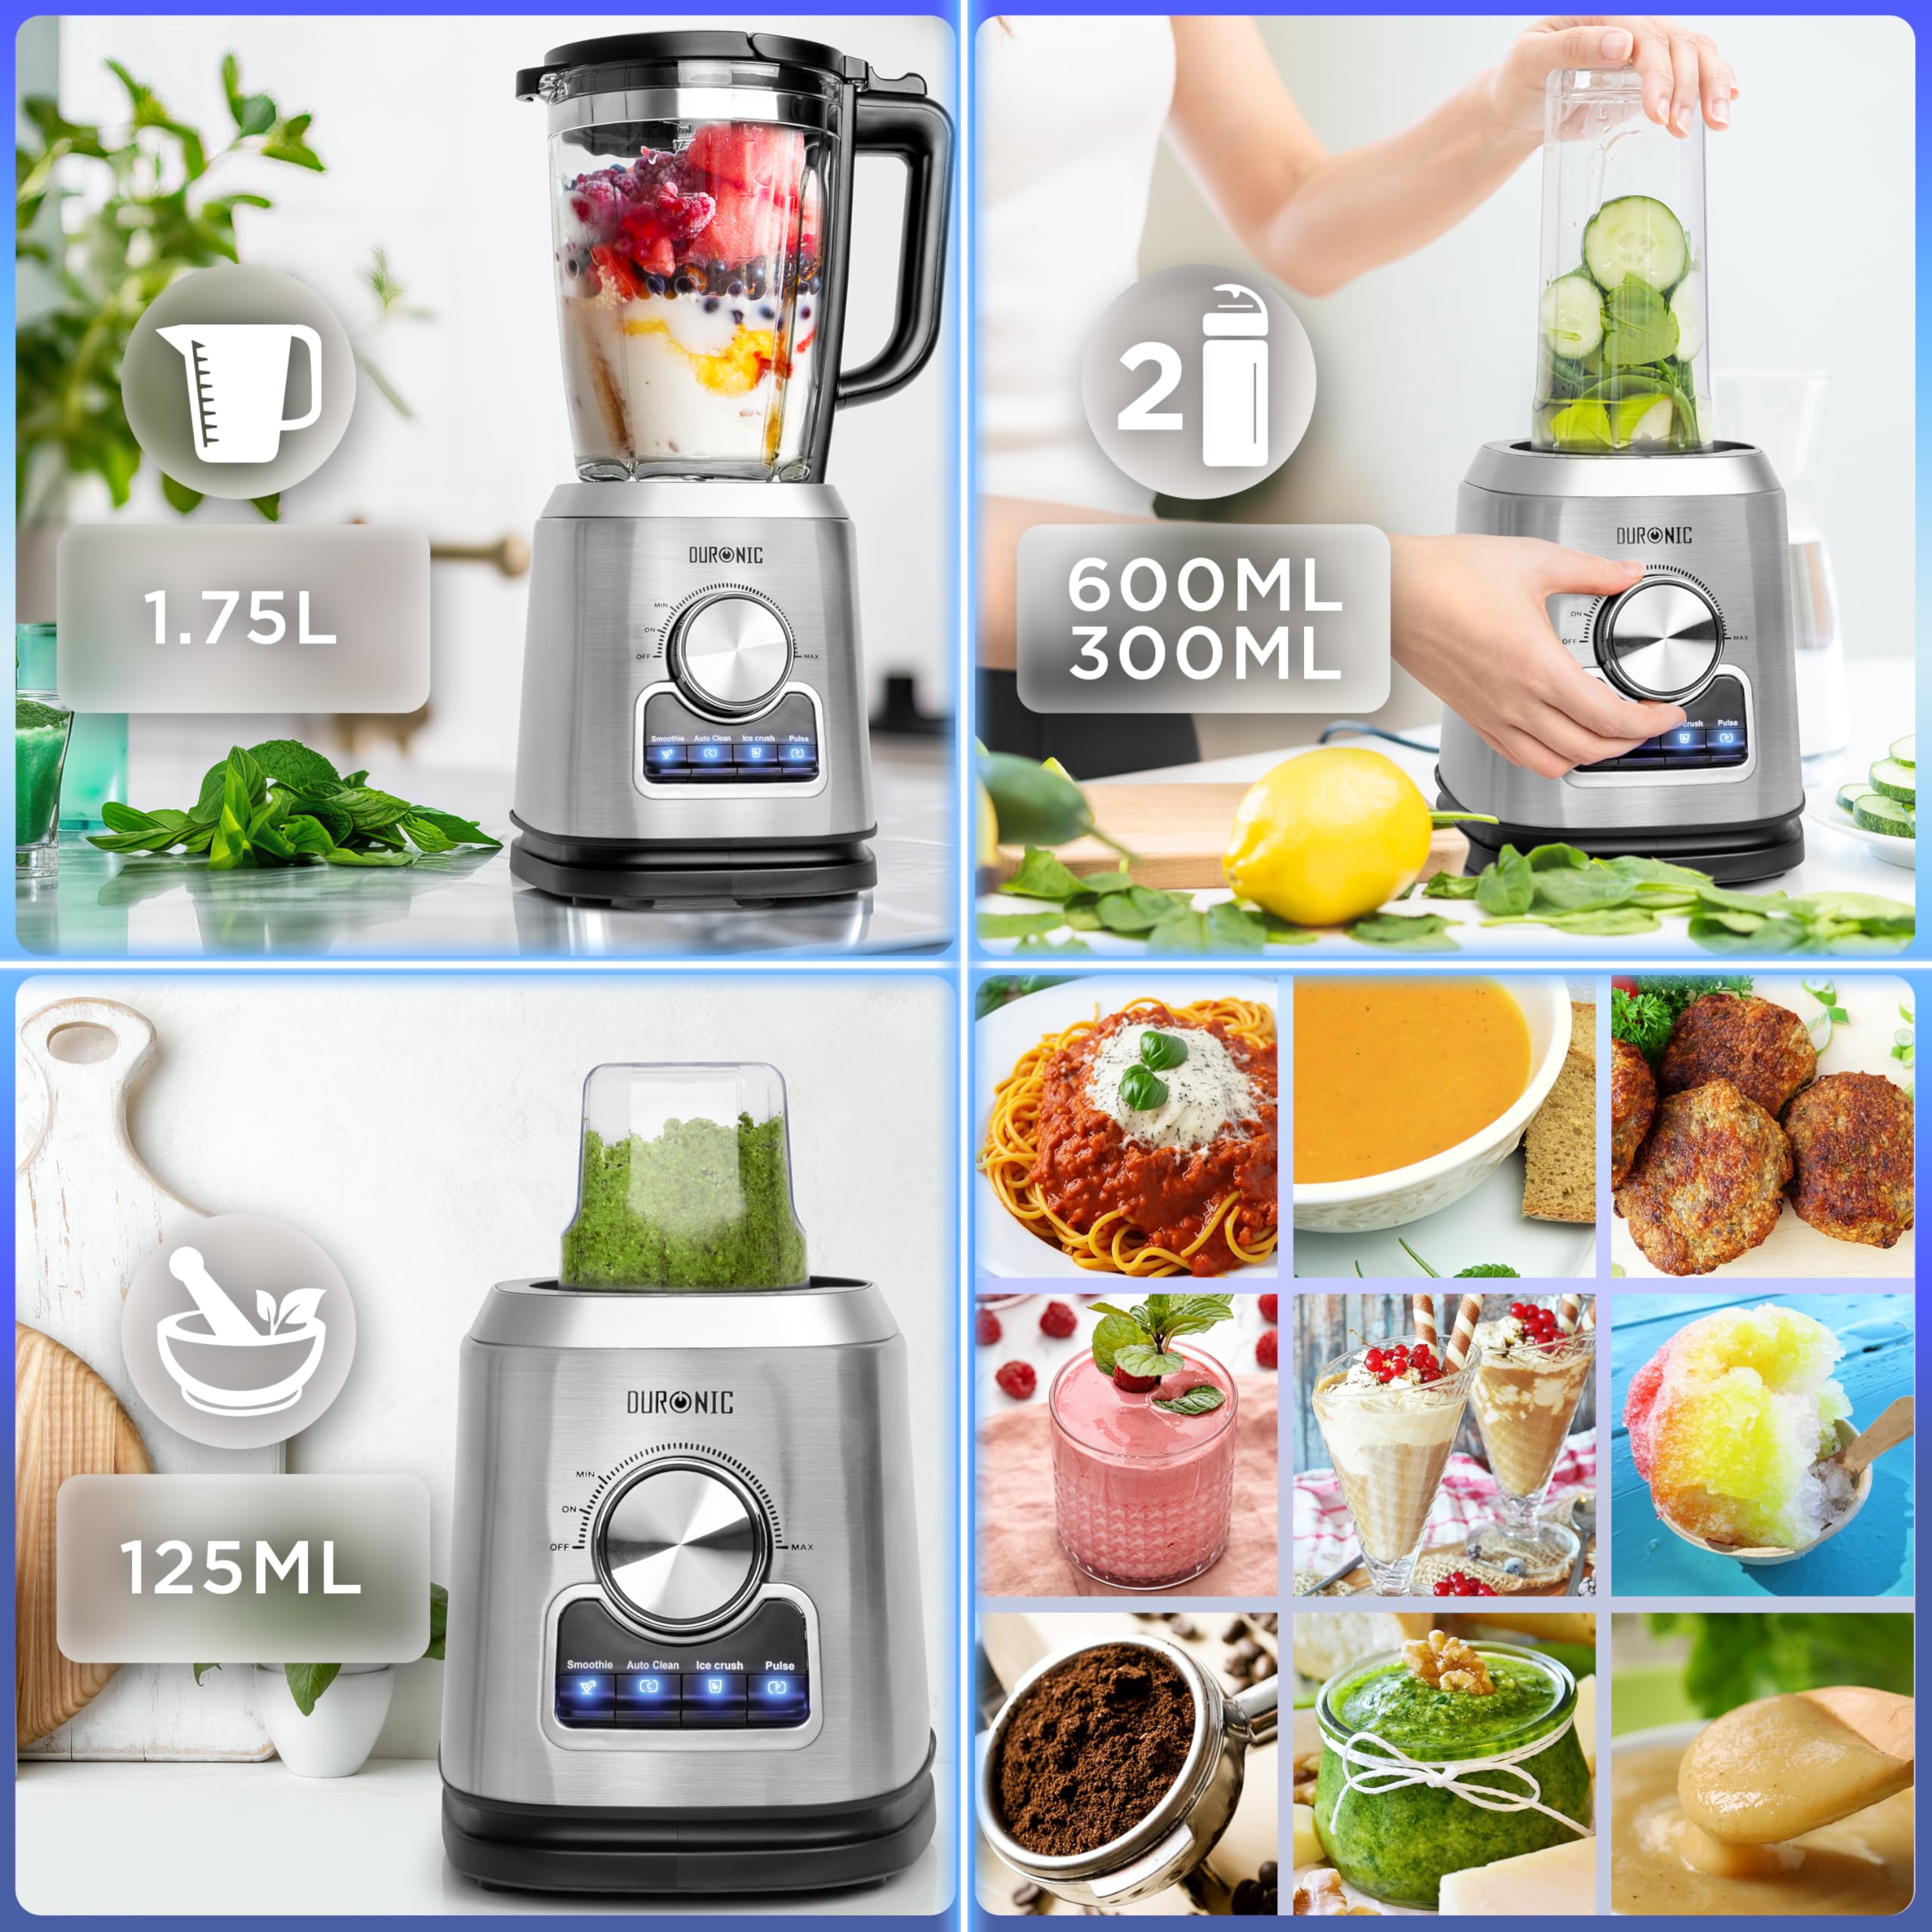 Duronic Jug Blender BL114 with Grinder 1.75L Glass Table Jug, 1400W Stainless Steel Mini Blender with 6 sided Blades, with Pre-Set Functions, Ideal for Baby food, Soups and Protein Shakes